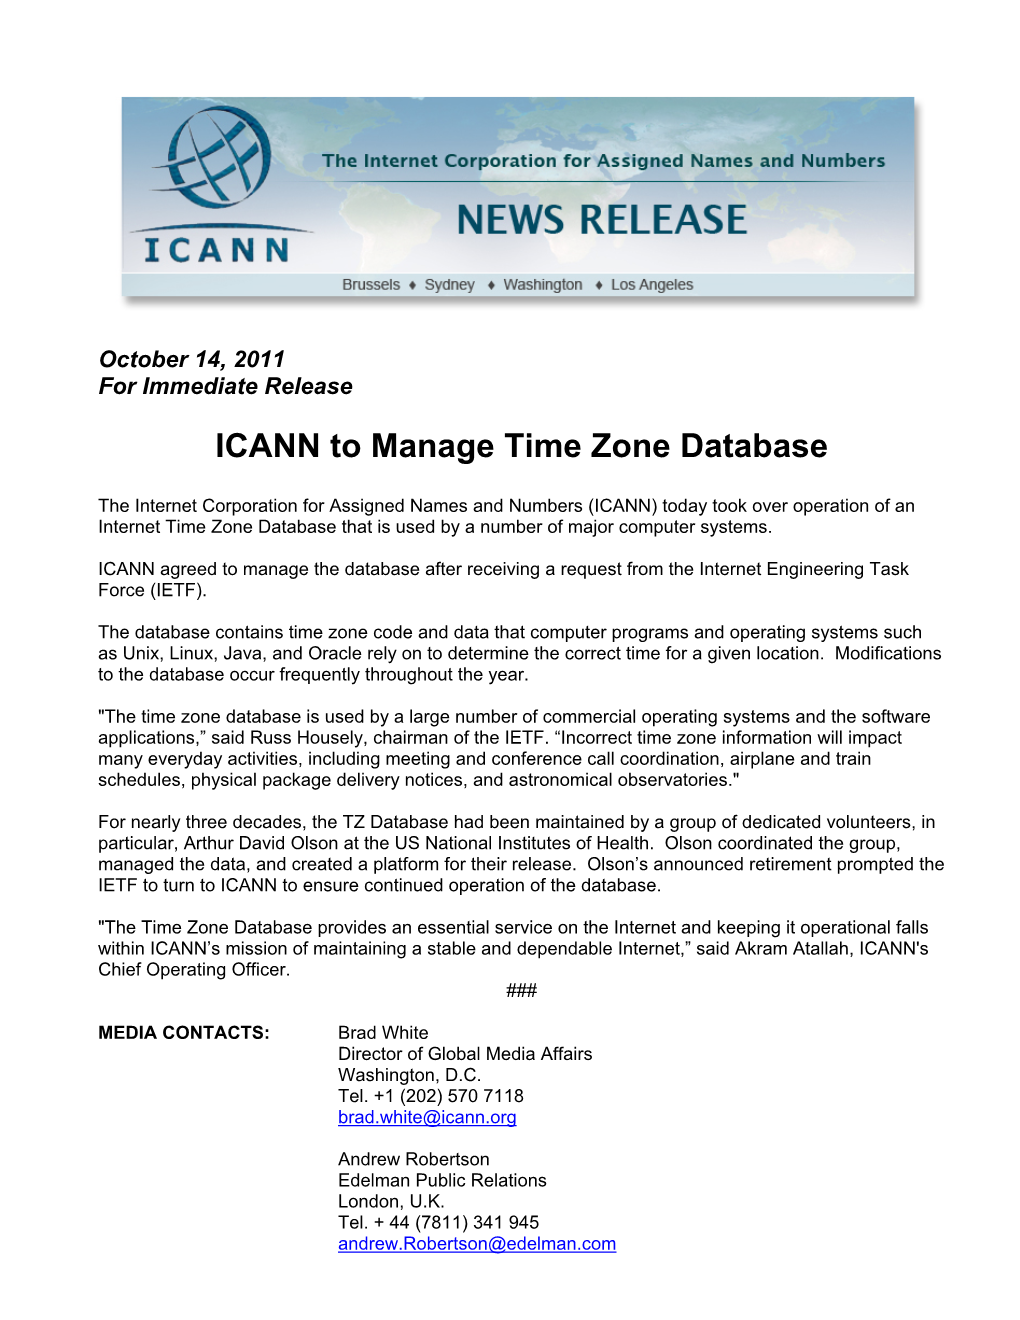 ICANN to Manage Time Zone Database